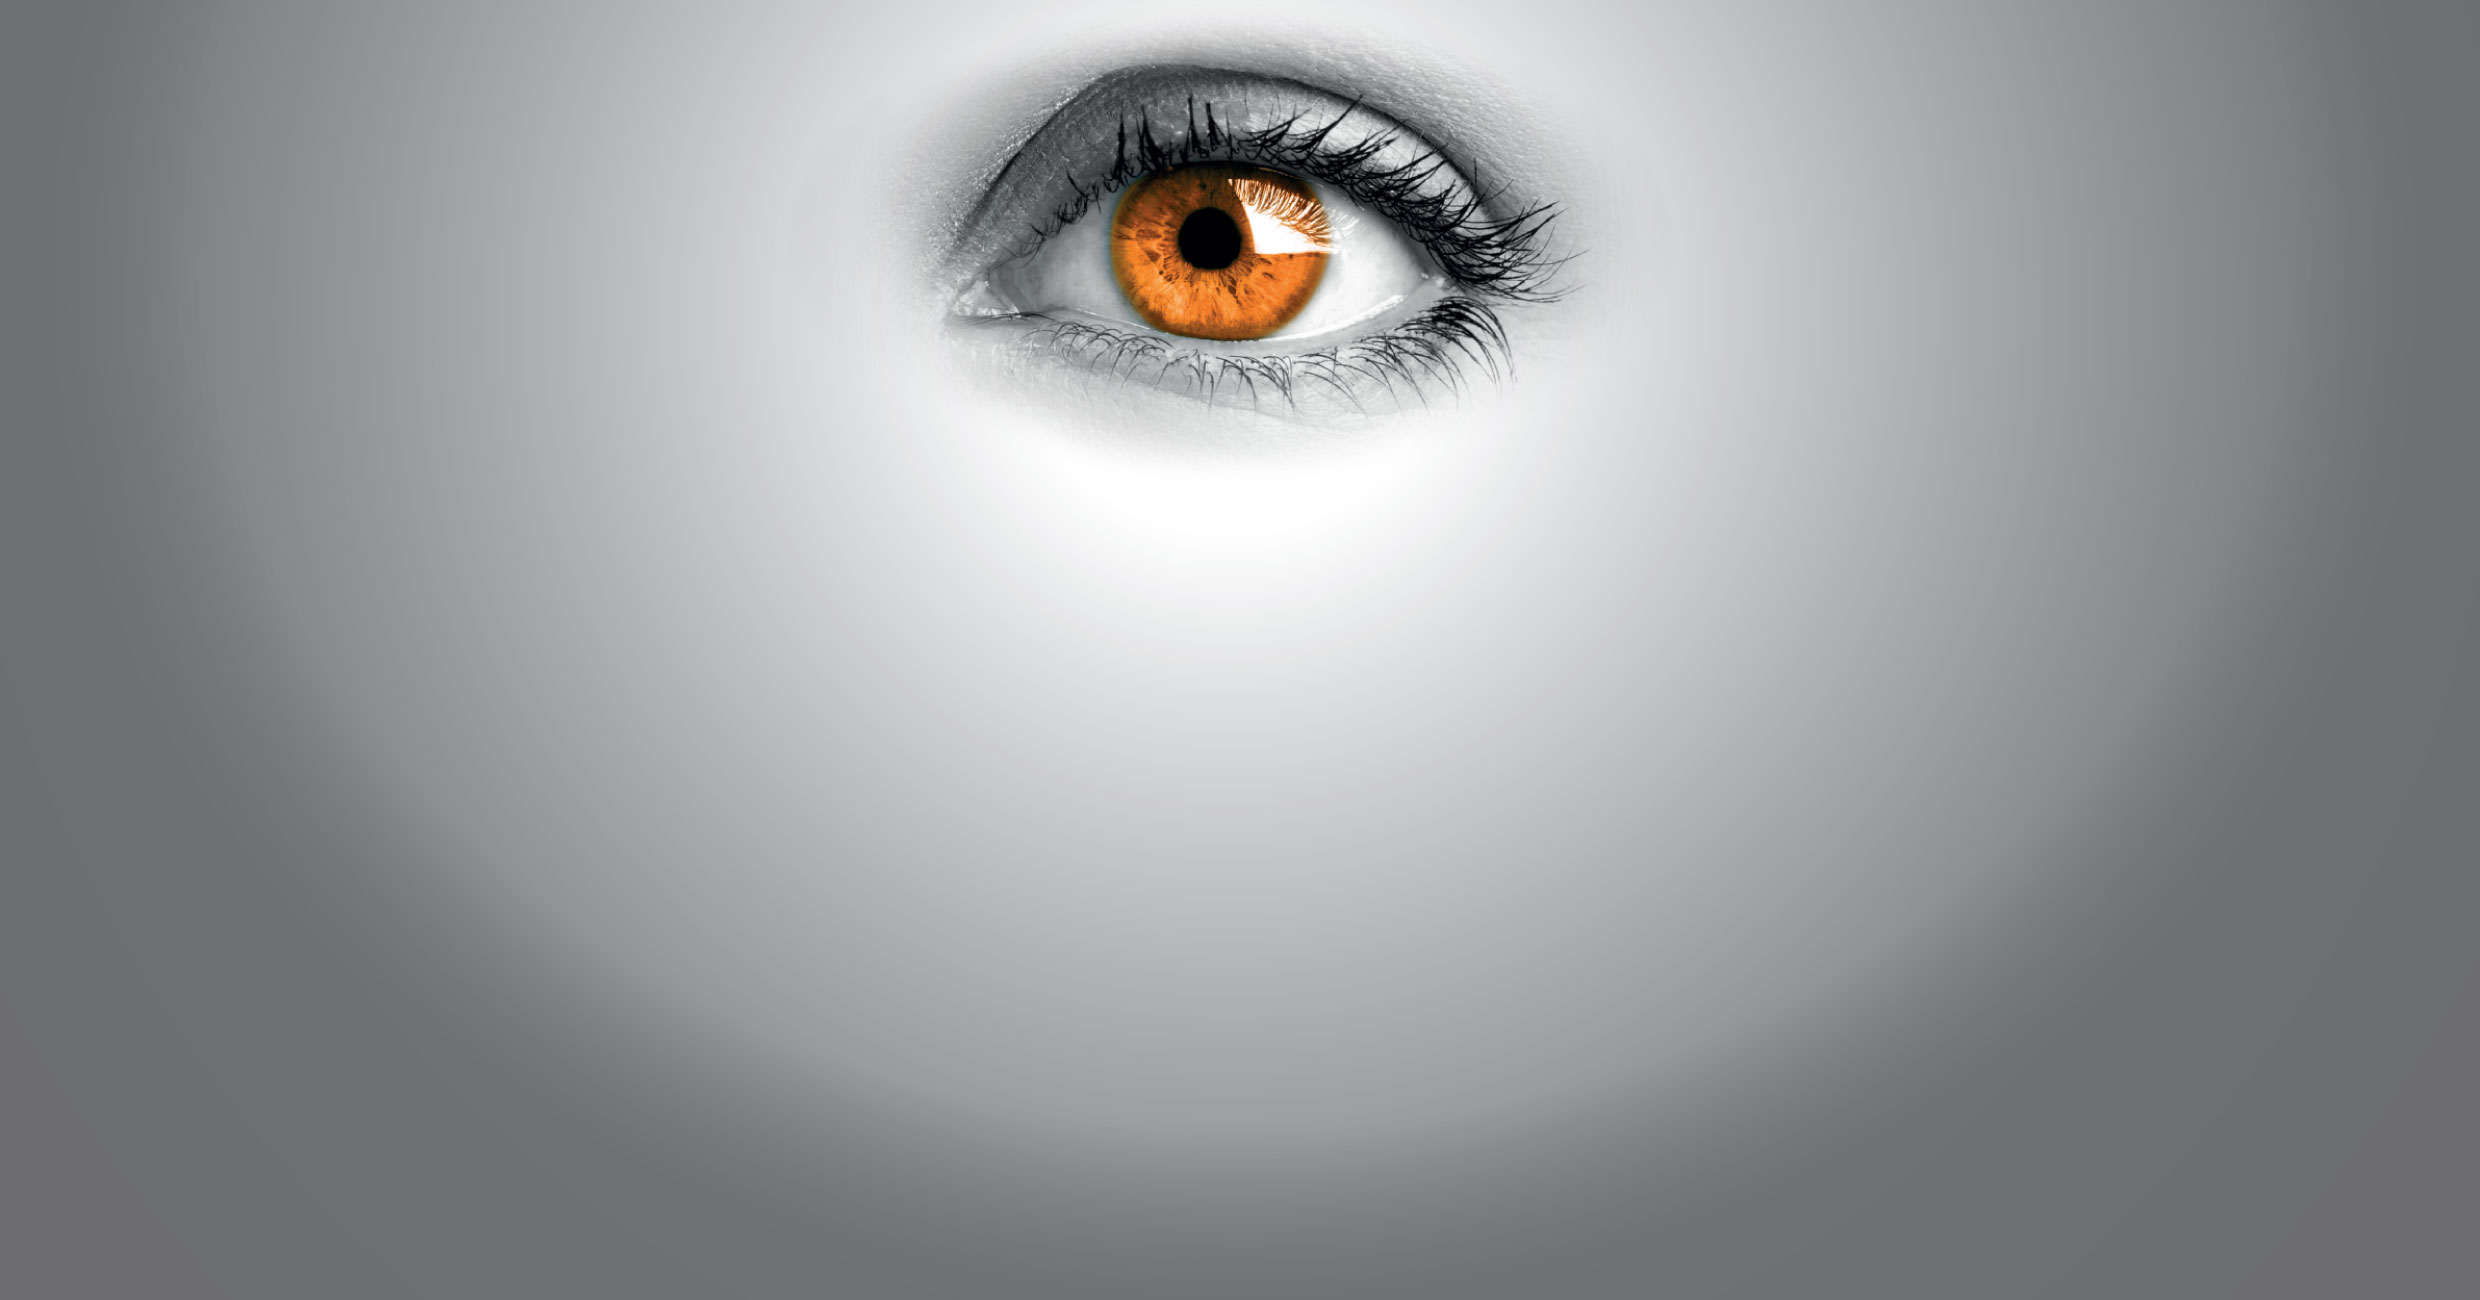 training eyes to save lives background image of an eye